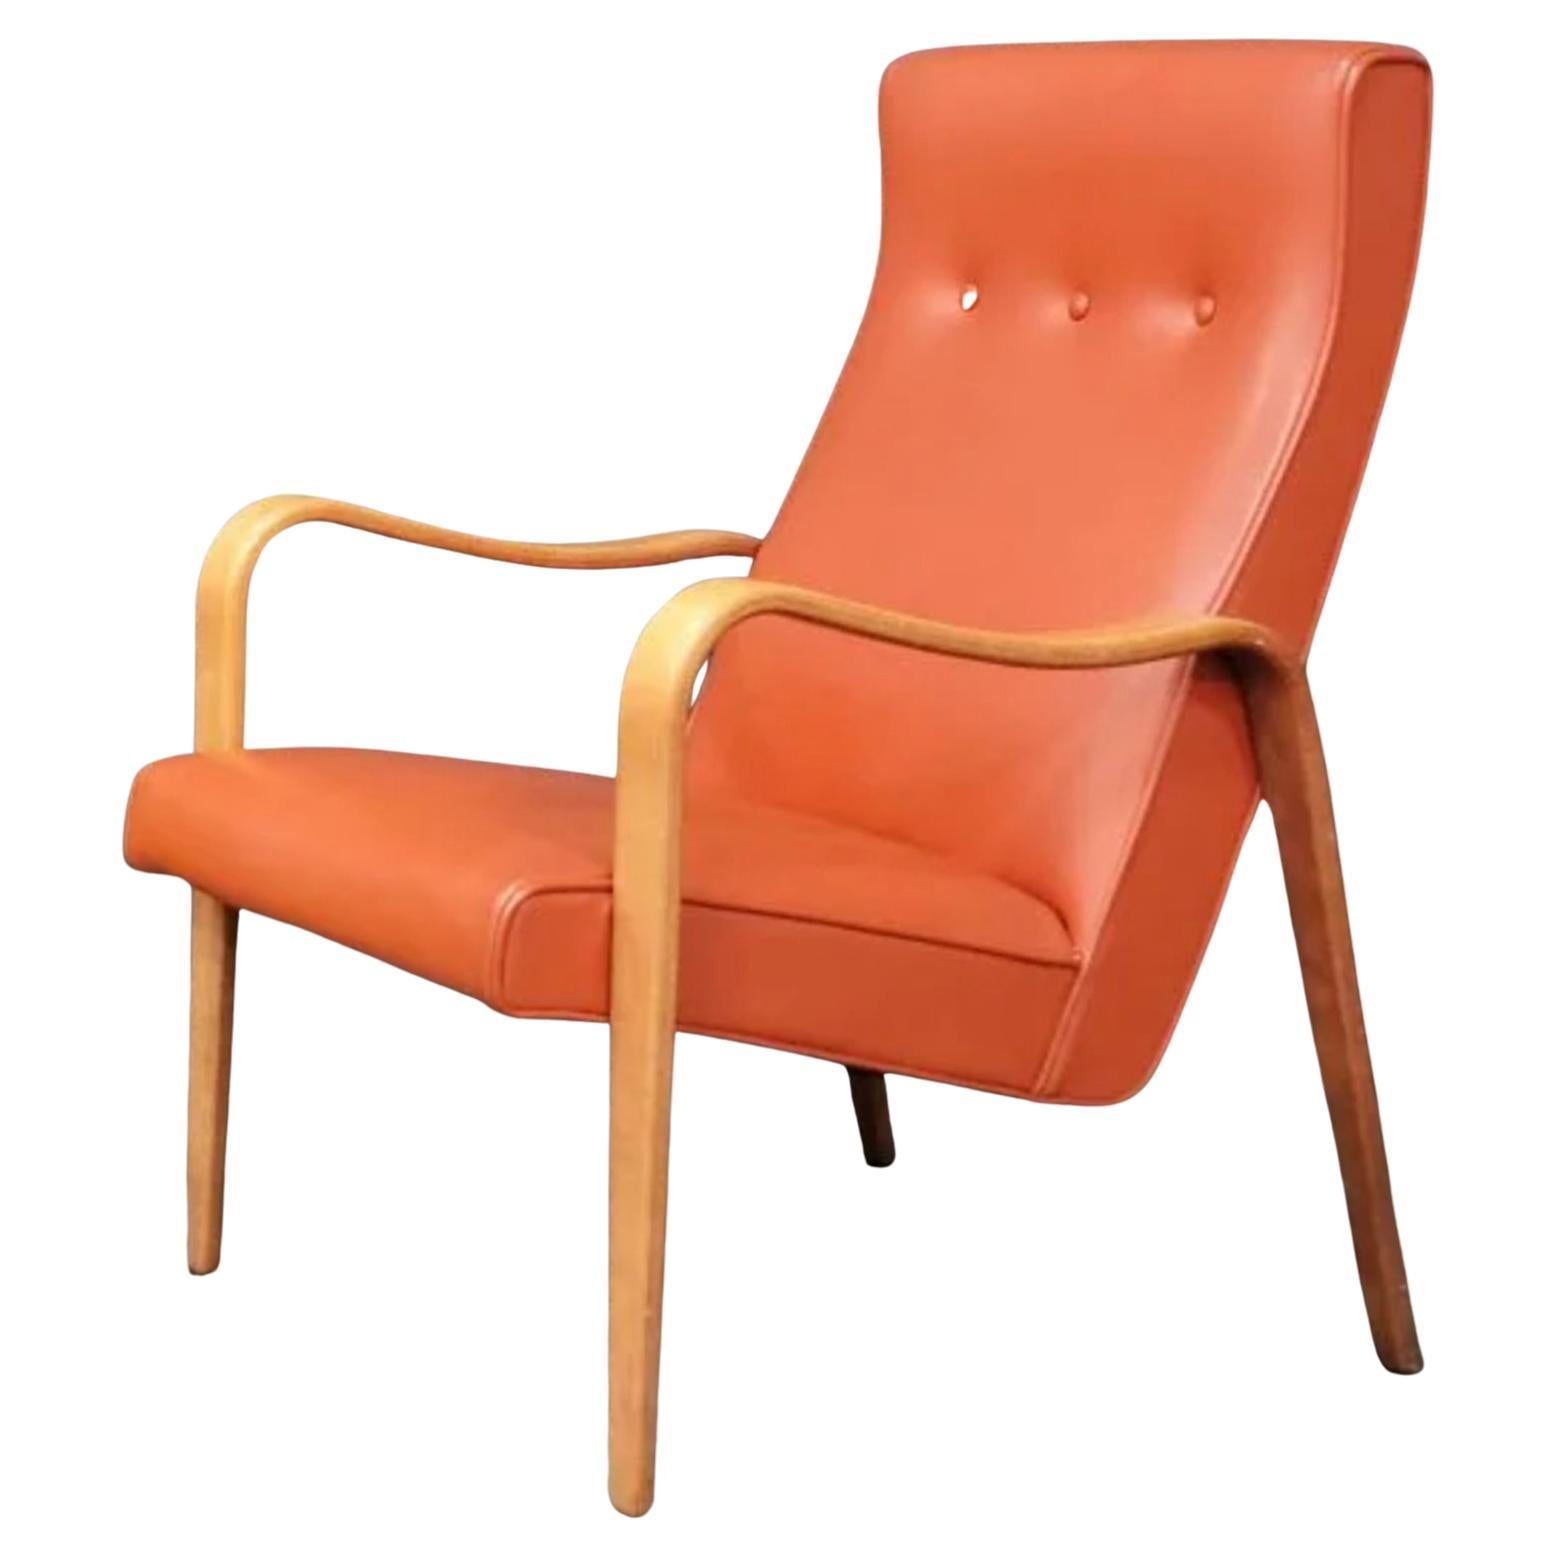 (1) Mid-Century Modern Thonet bentwood birch lounge armchair. Has original medium pastel Reddish Orange color vinyl upholstery. Great vintage condition. Timeless chair design by Thonet. Curved birch bentwood arms. Located in Brooklyn NYC.

24